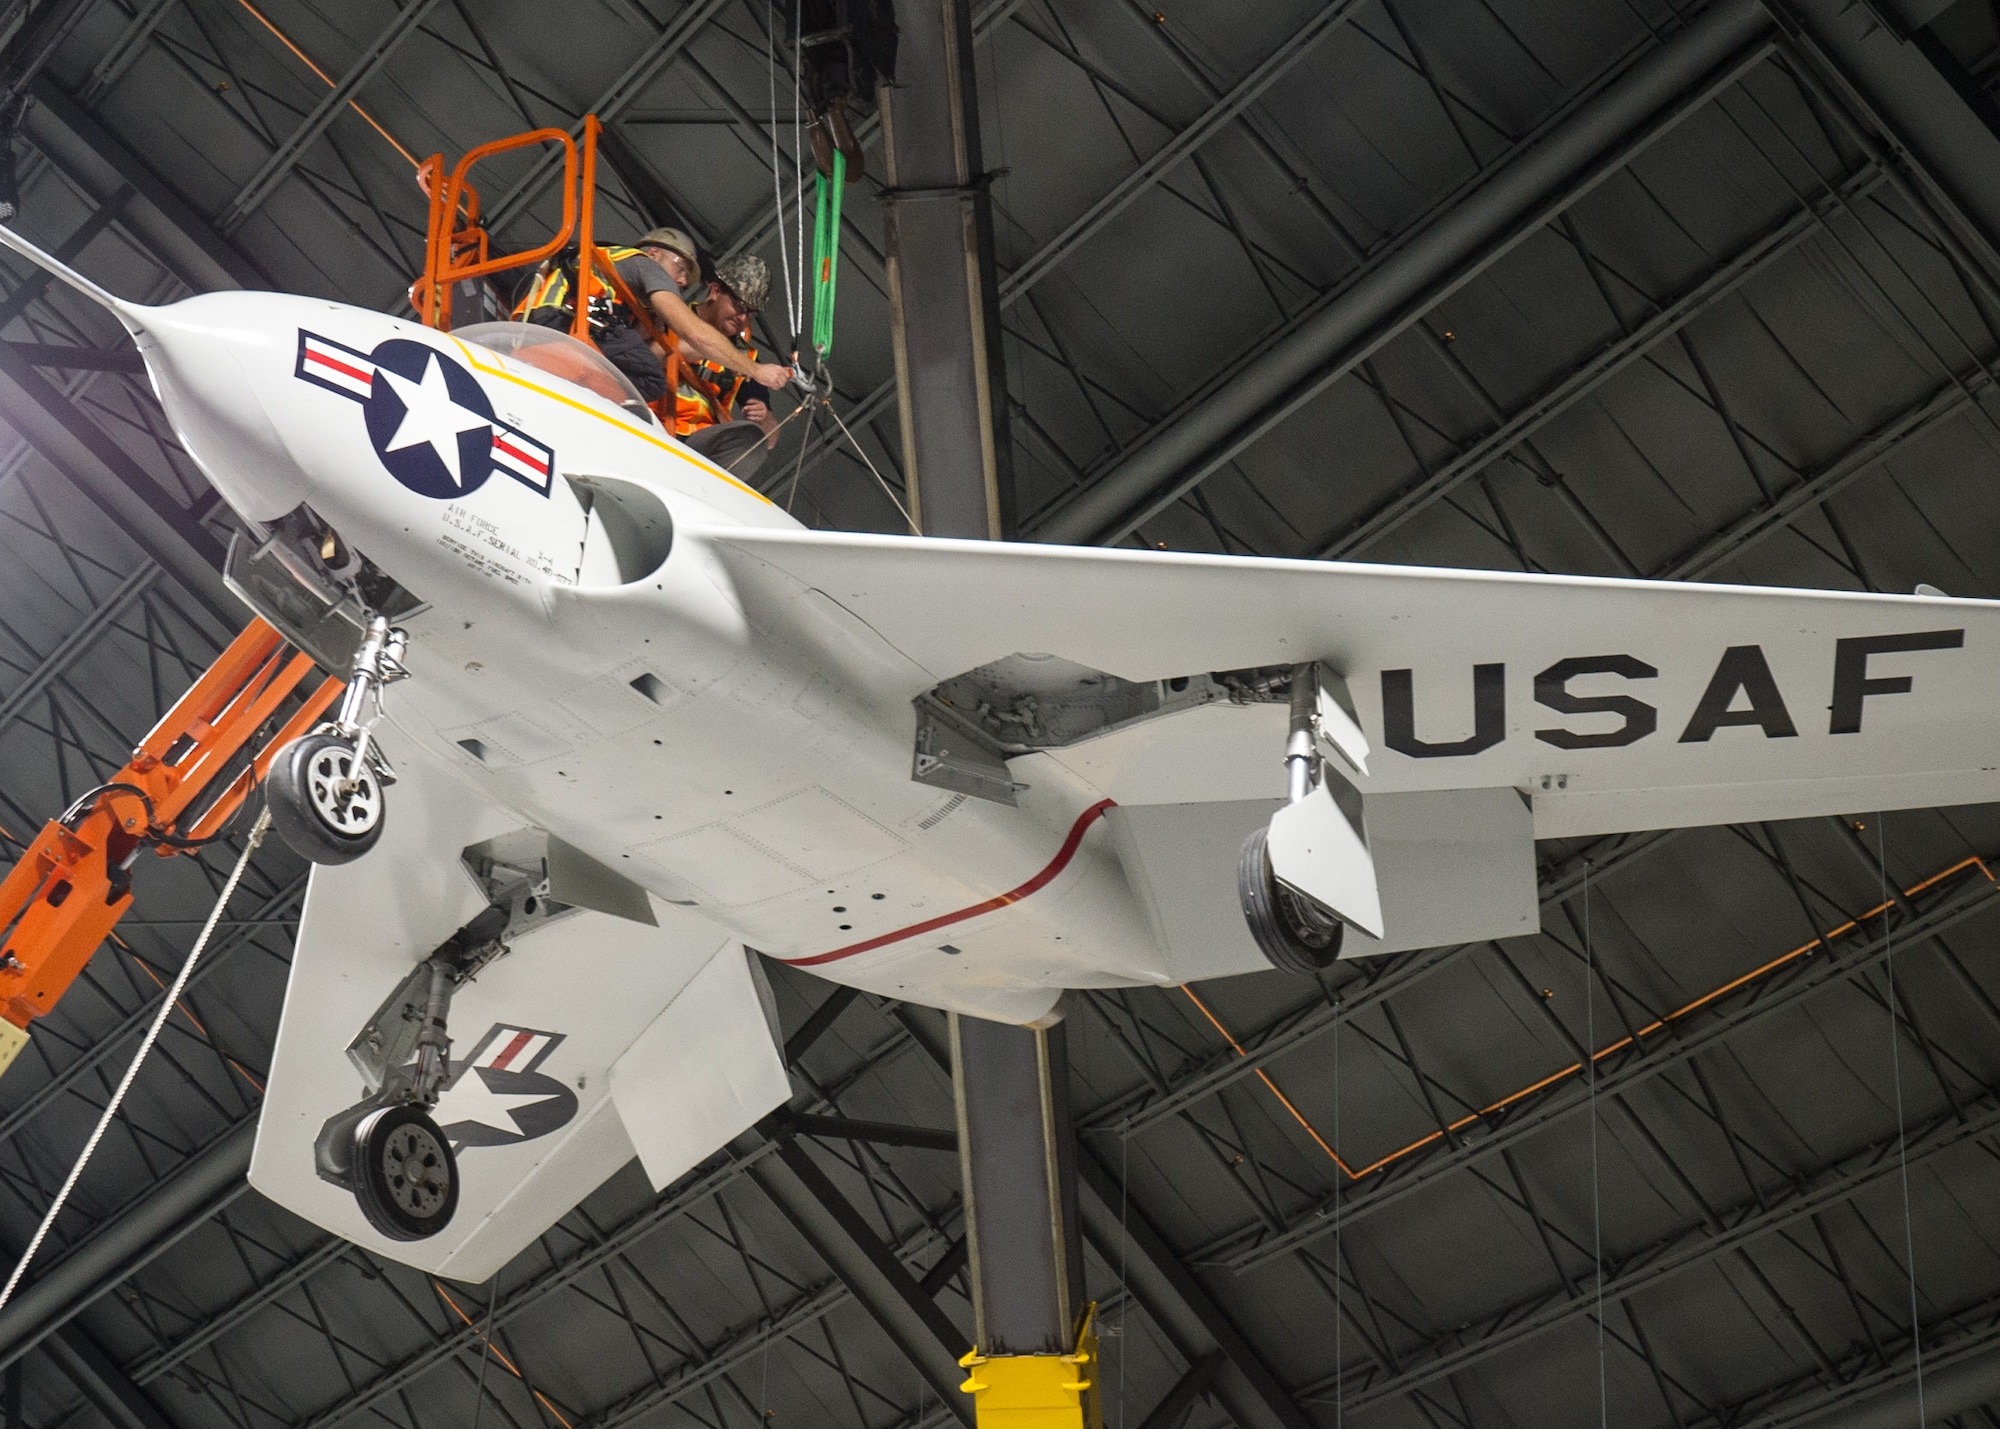 Restoration staff move the Northrop X-4 Bantam aircraft into position within the R&D Gallery at the National Museum of the U.S. Air Force in November 2015. (U.S. Air Force photo)